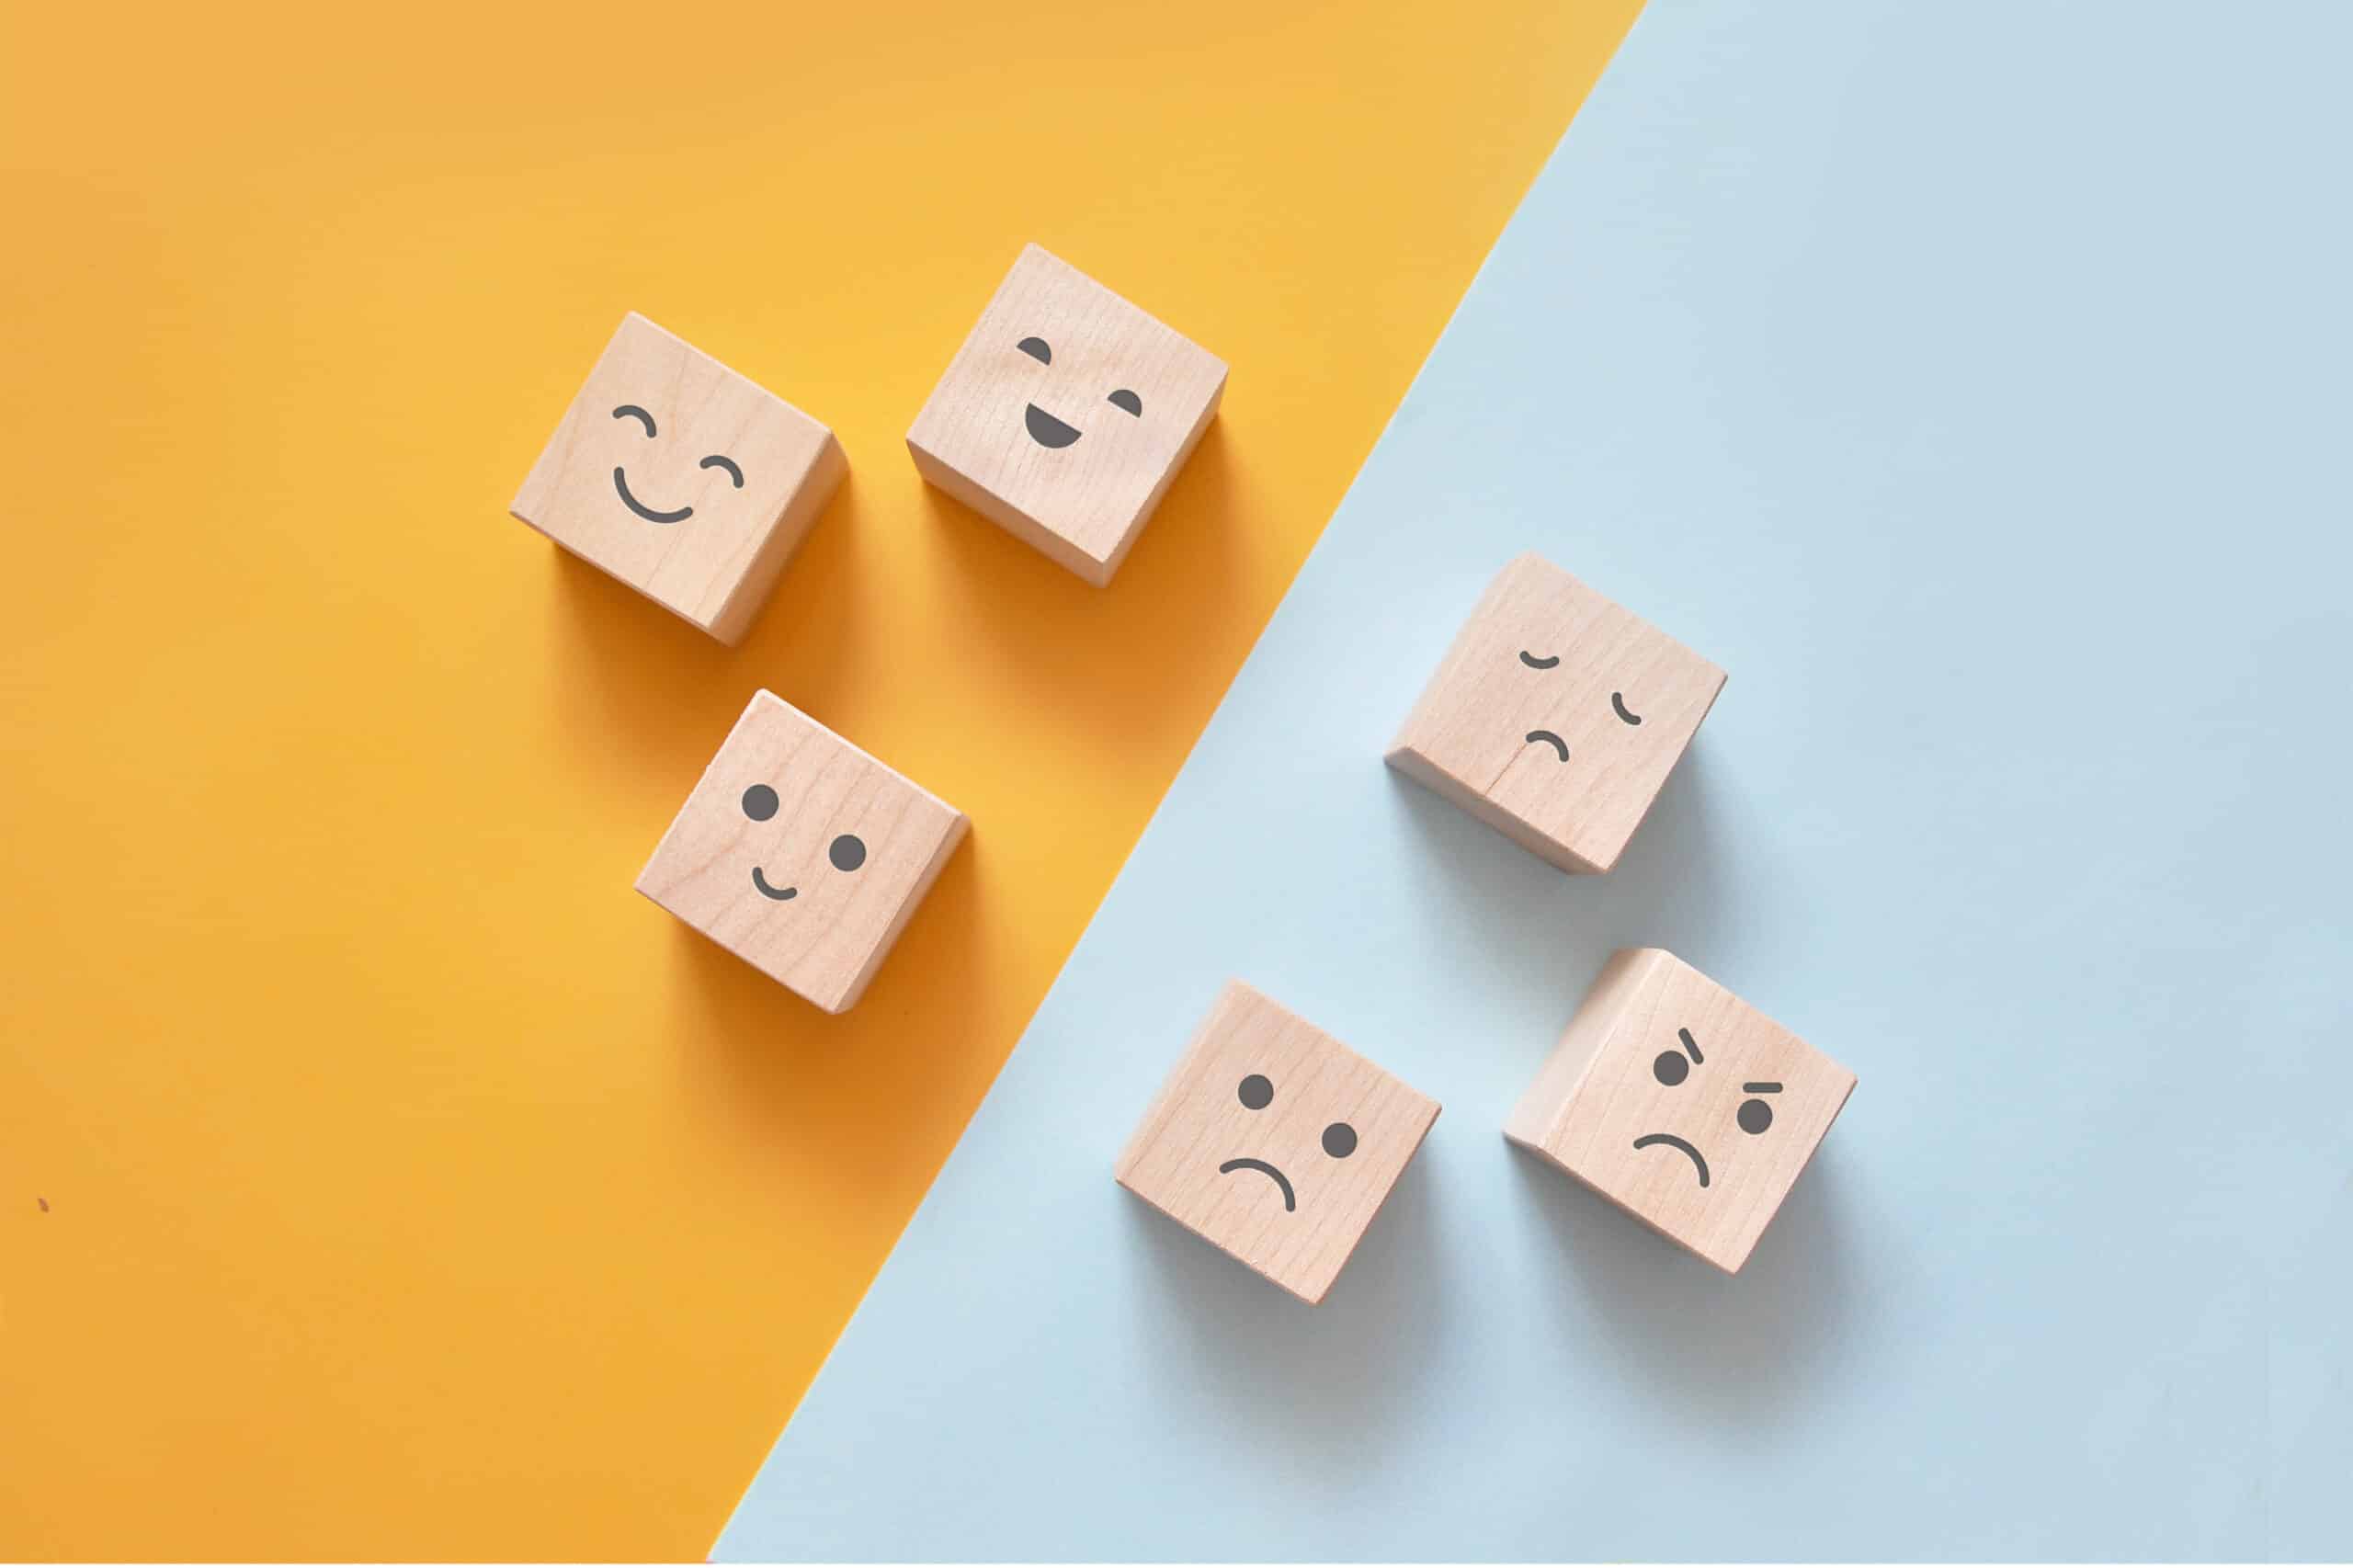 Wooden blocks with faces of different emotions separated by a diagonal line; emotional intelligence concept